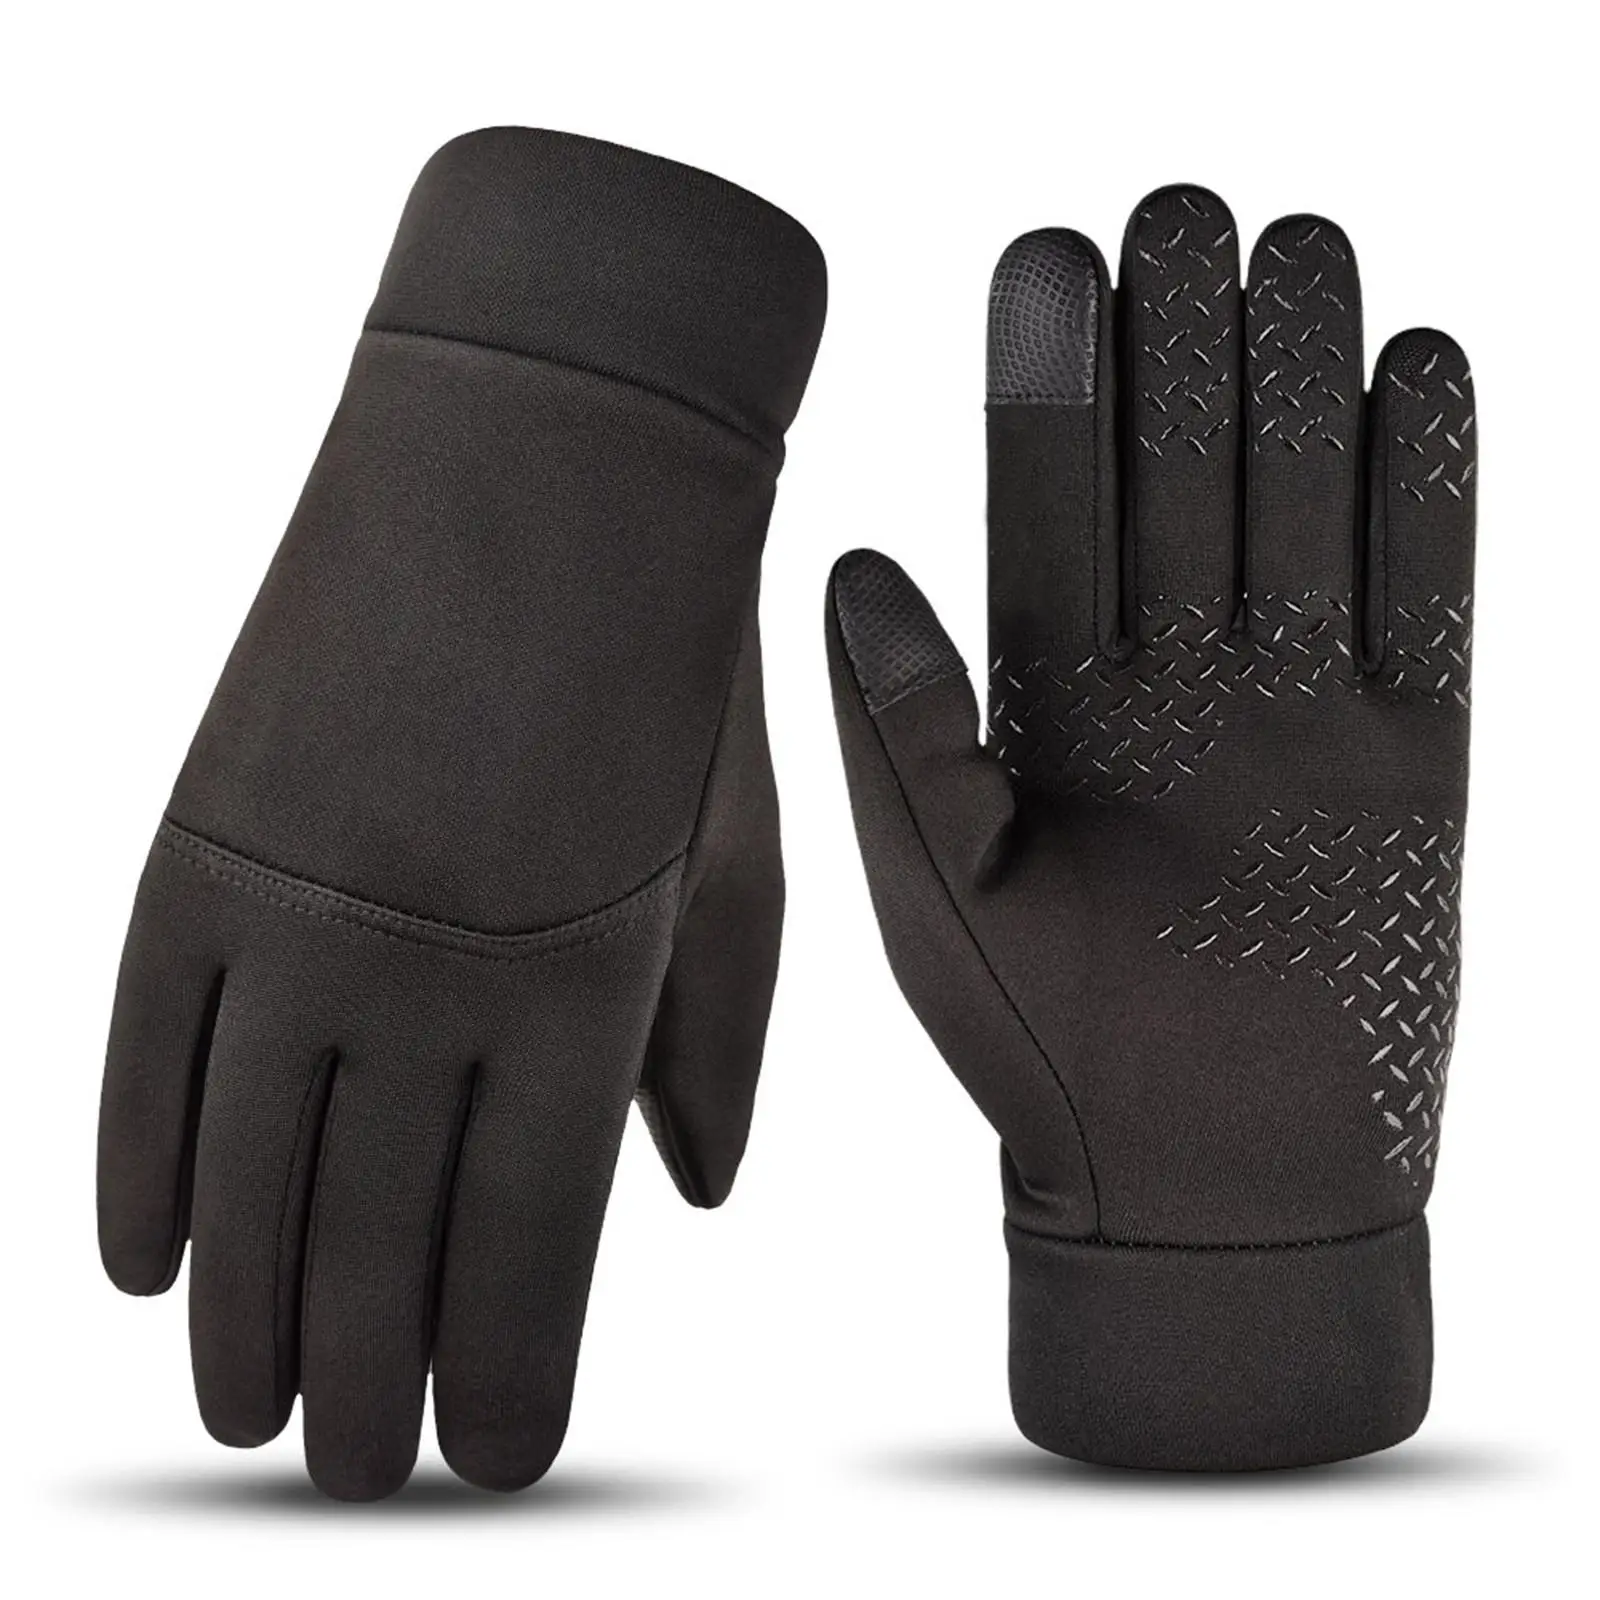 Waterproof Winter Gloves Full Finger Warm Gloves for Climbing Outdoor Activities Cycling Apparel Accessories Motorcycle Skating